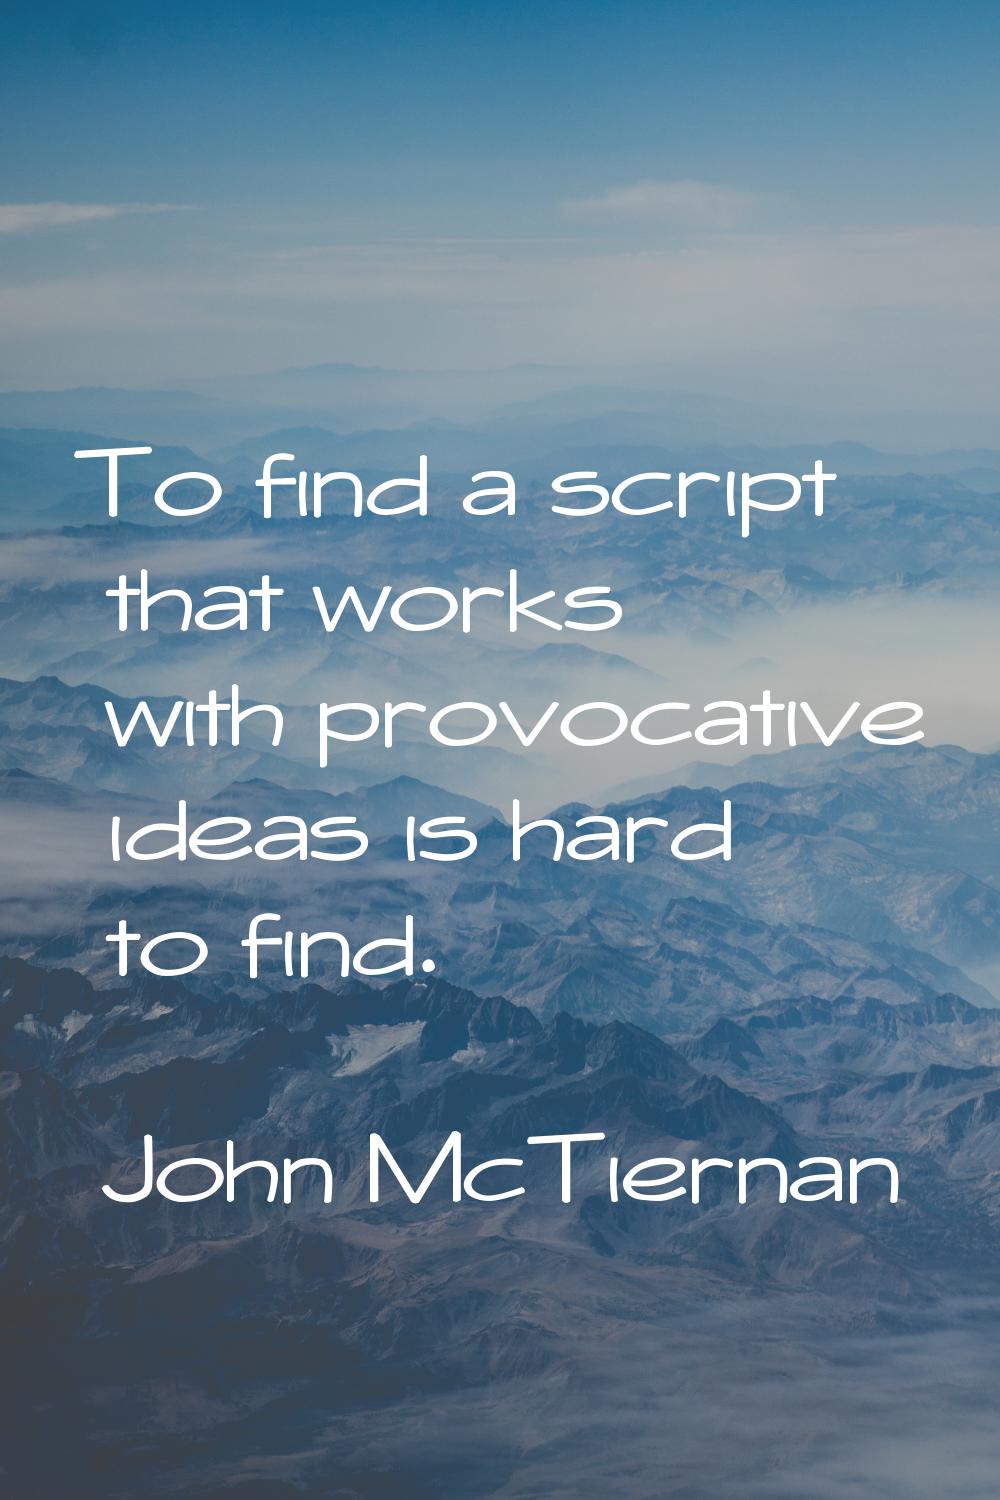 To find a script that works with provocative ideas is hard to find.